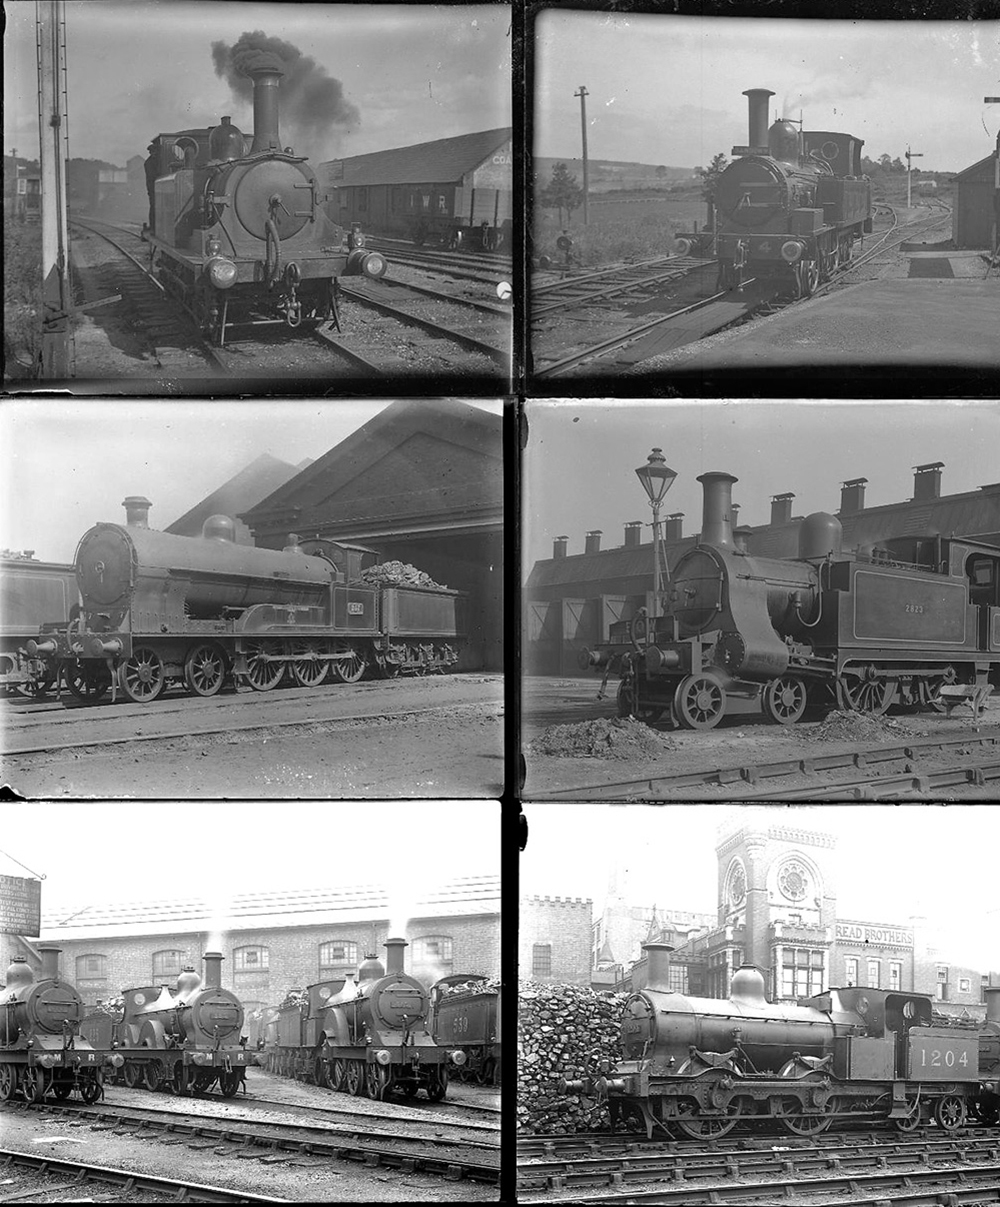 50 mostly large format glass negatives. Taken in 1923 includes: Isle of Wight Rly, MR LSWR and